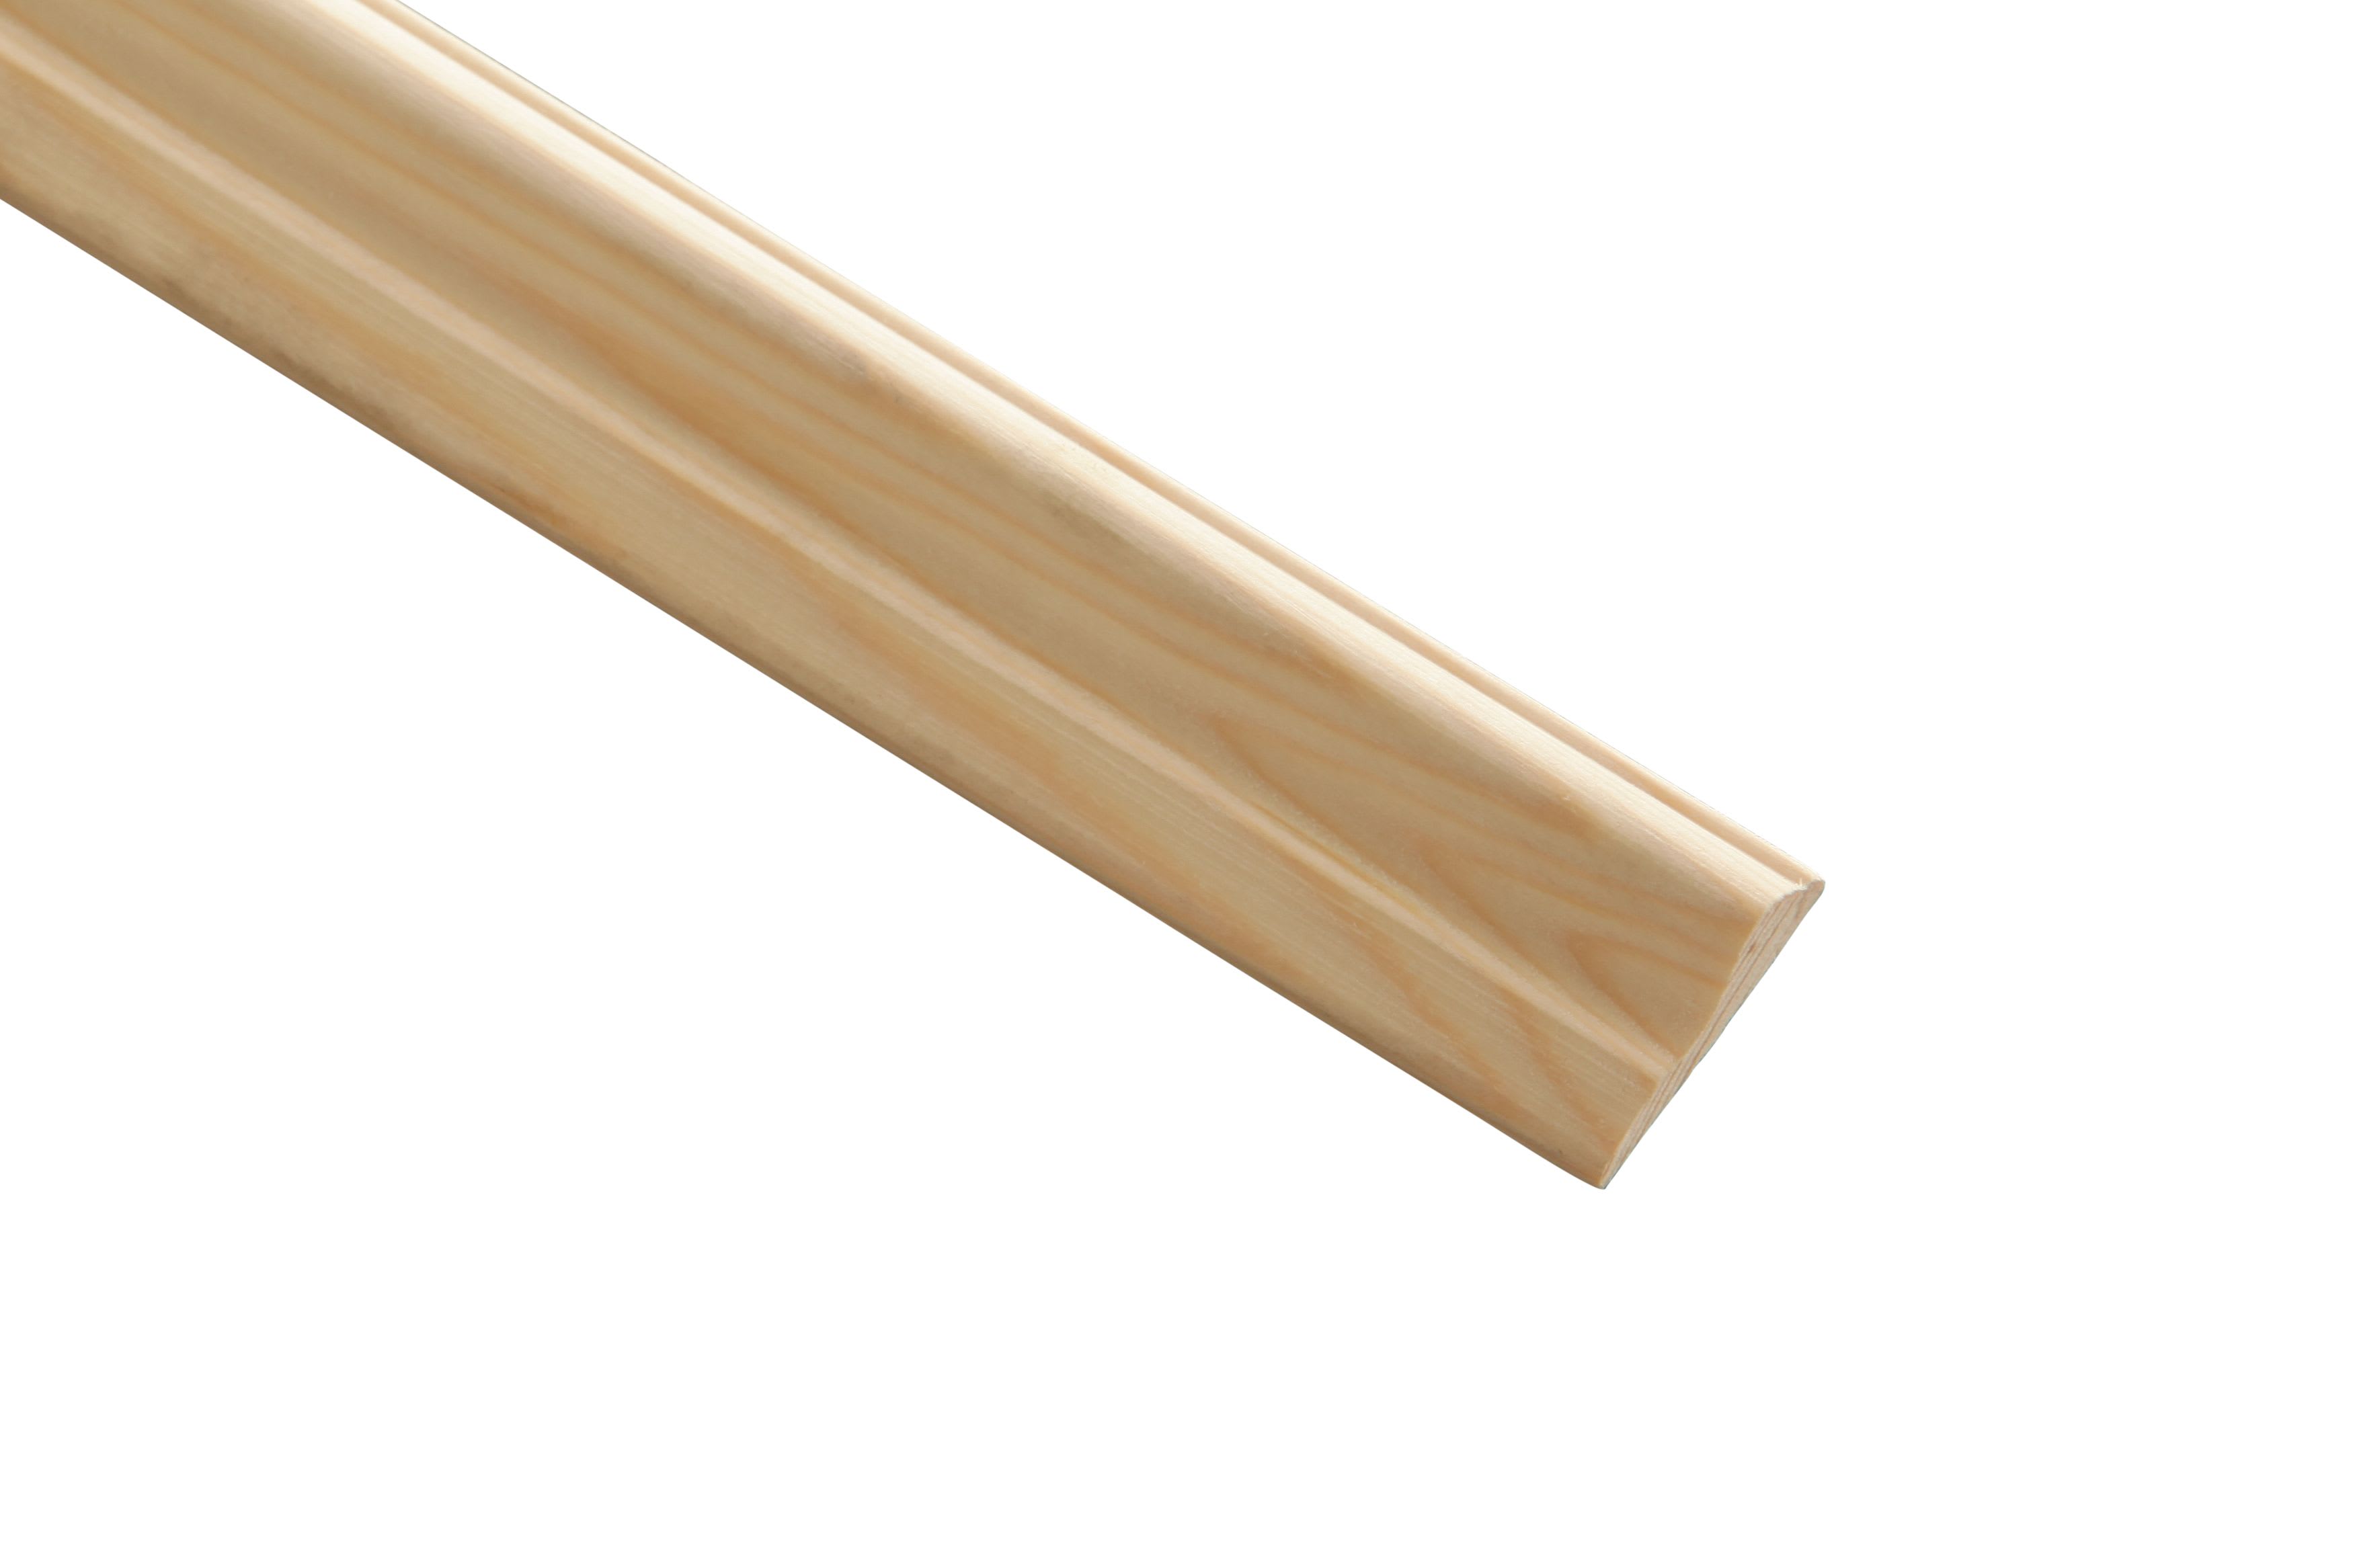 Wickes Pine 2 Rise Panel Moulding - 28 x 9 x 2400mm | Wickes.co.uk